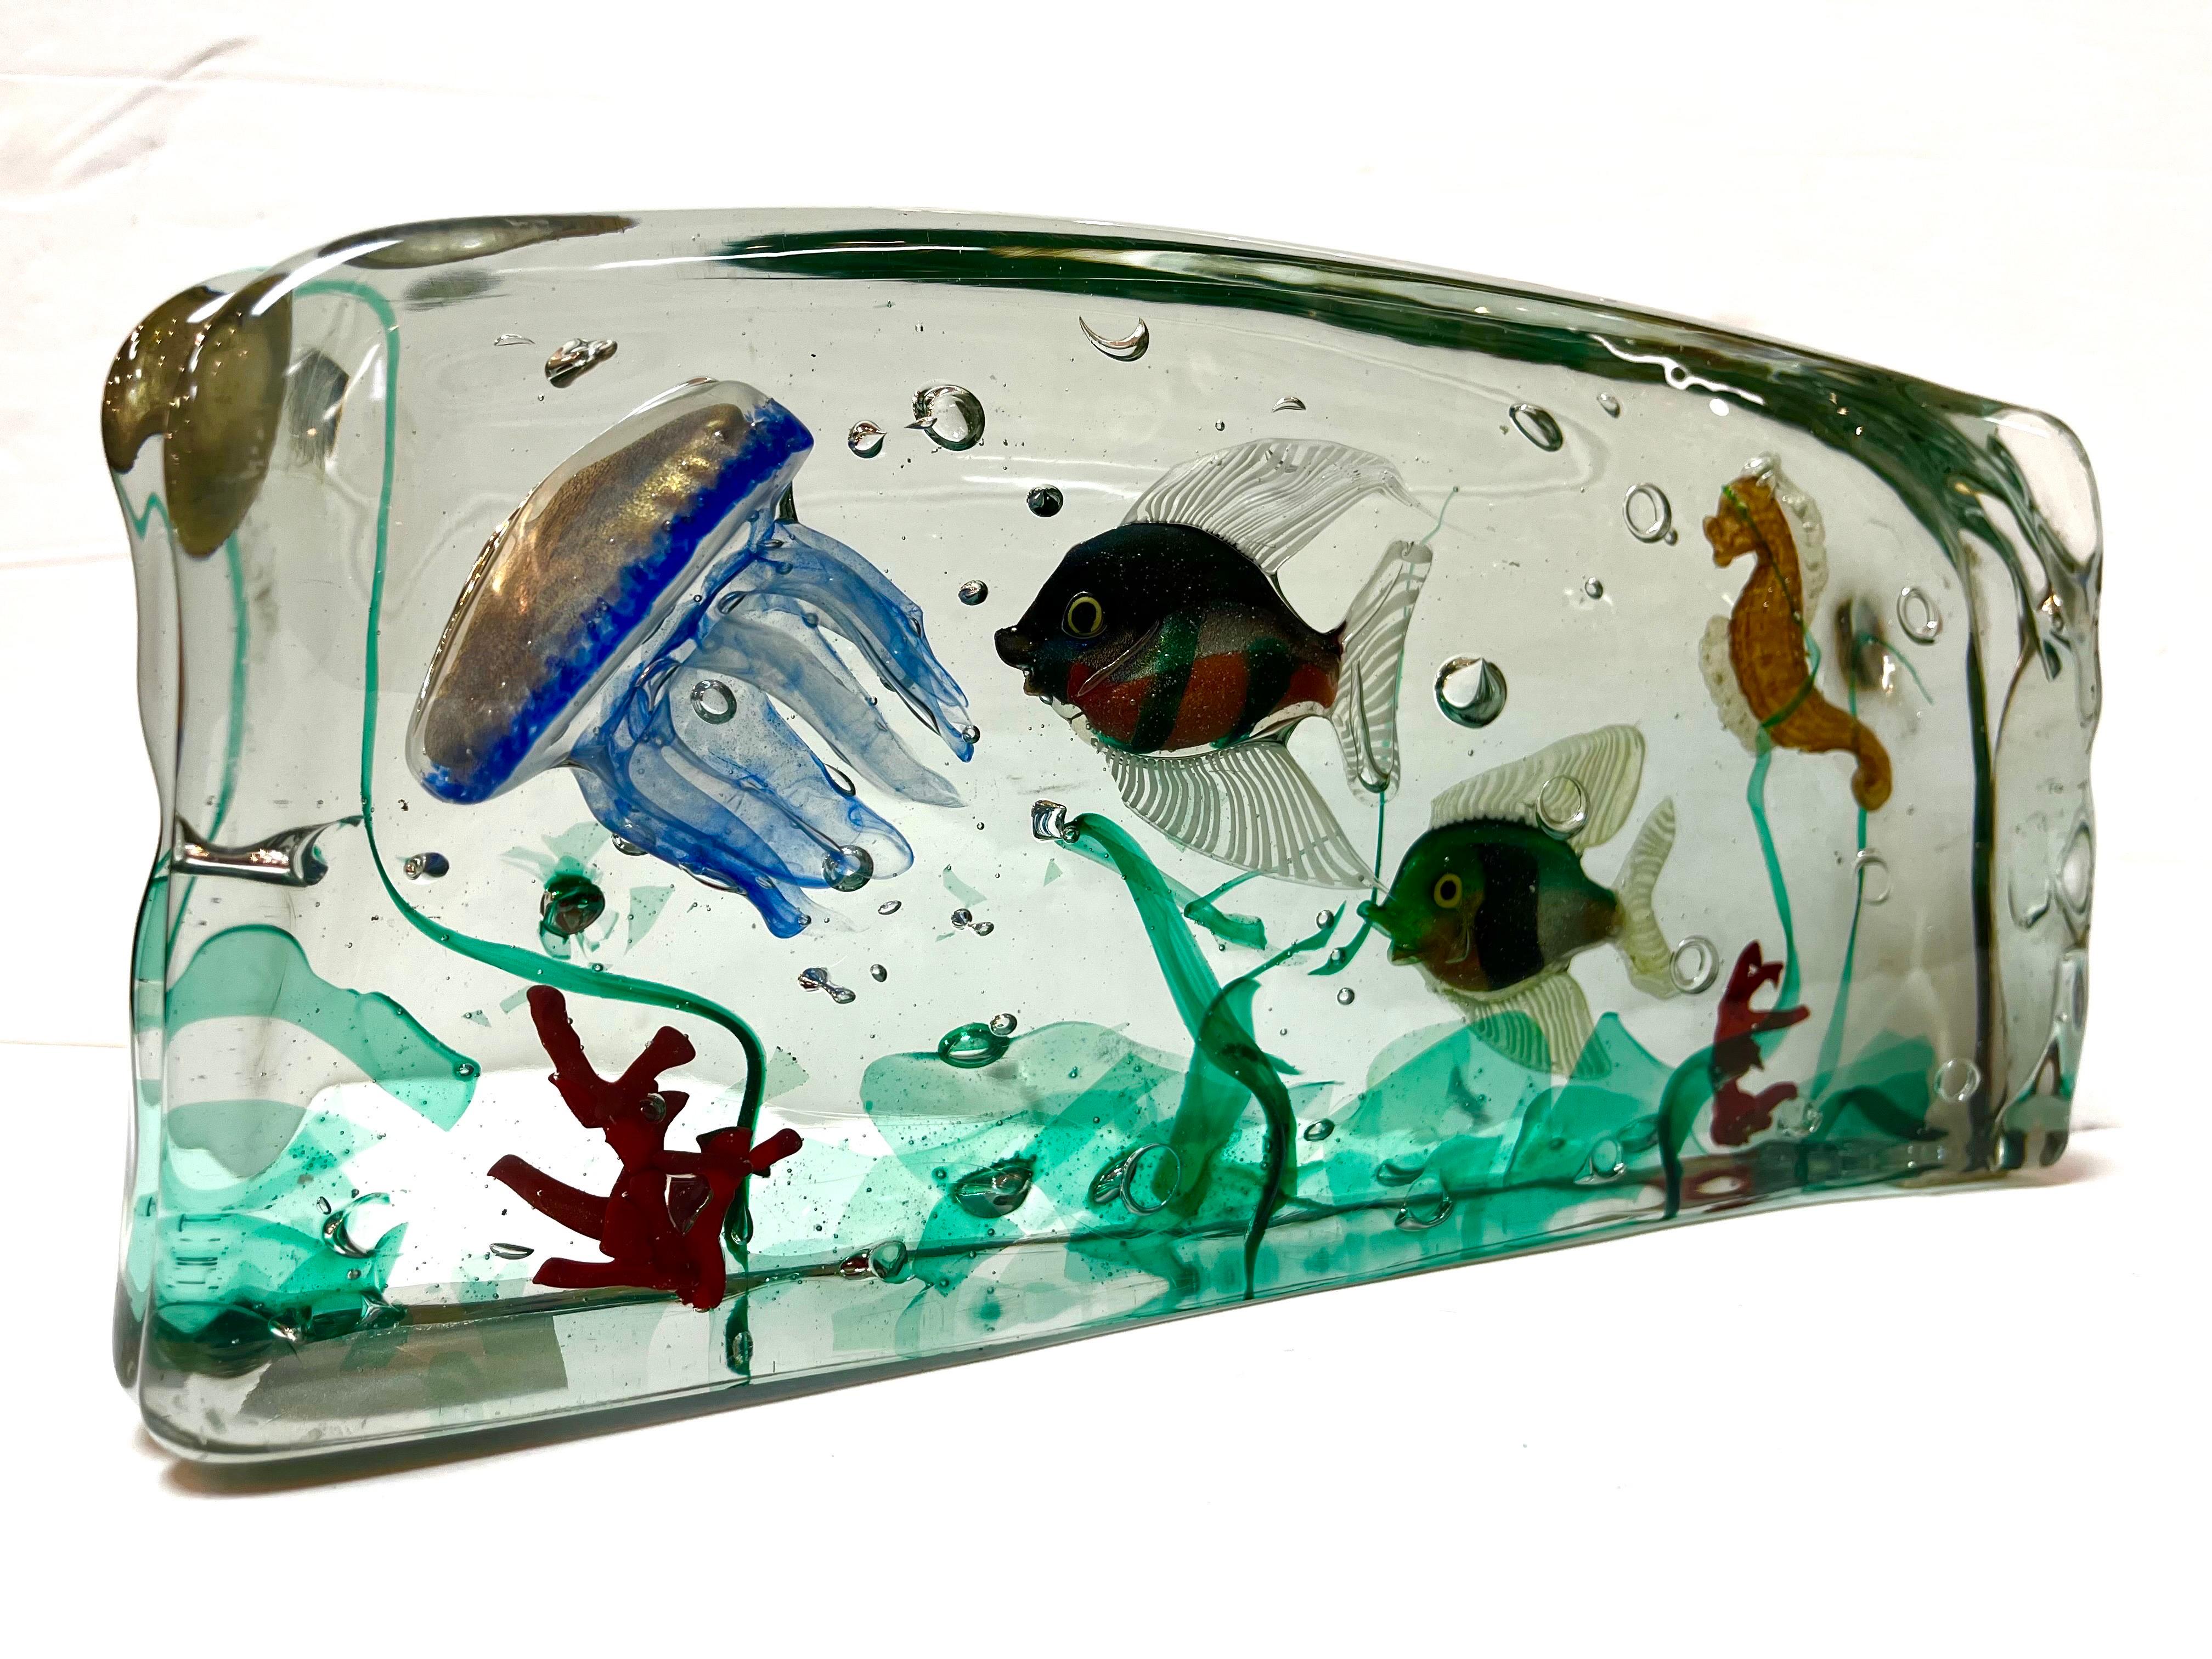 A mid century Murano glass aquarium sculpture in the style of those produced by Alfredo Barbini and Gino Cenedese. This sculpture features two fish, a jellyfish, a seahorse and various coral and seaweed. There are two felt squares attached to the